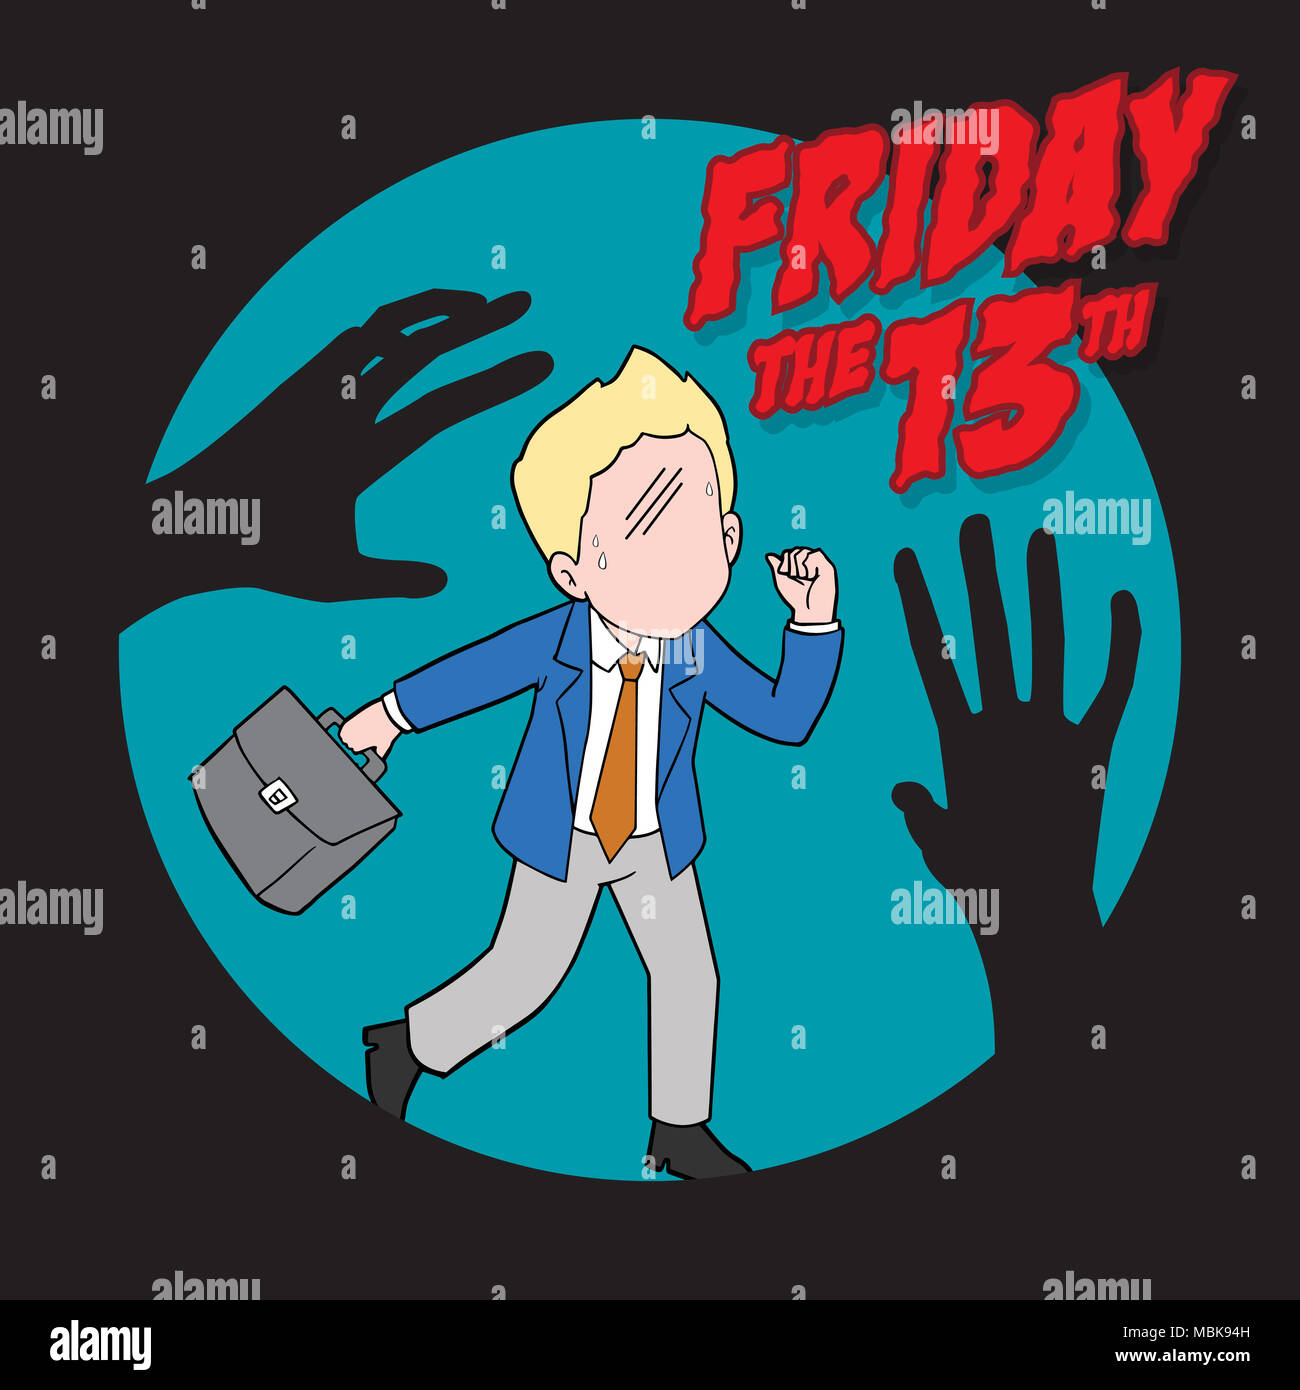 An illustration of superstitious businessman about friday the 13th Stock Photo